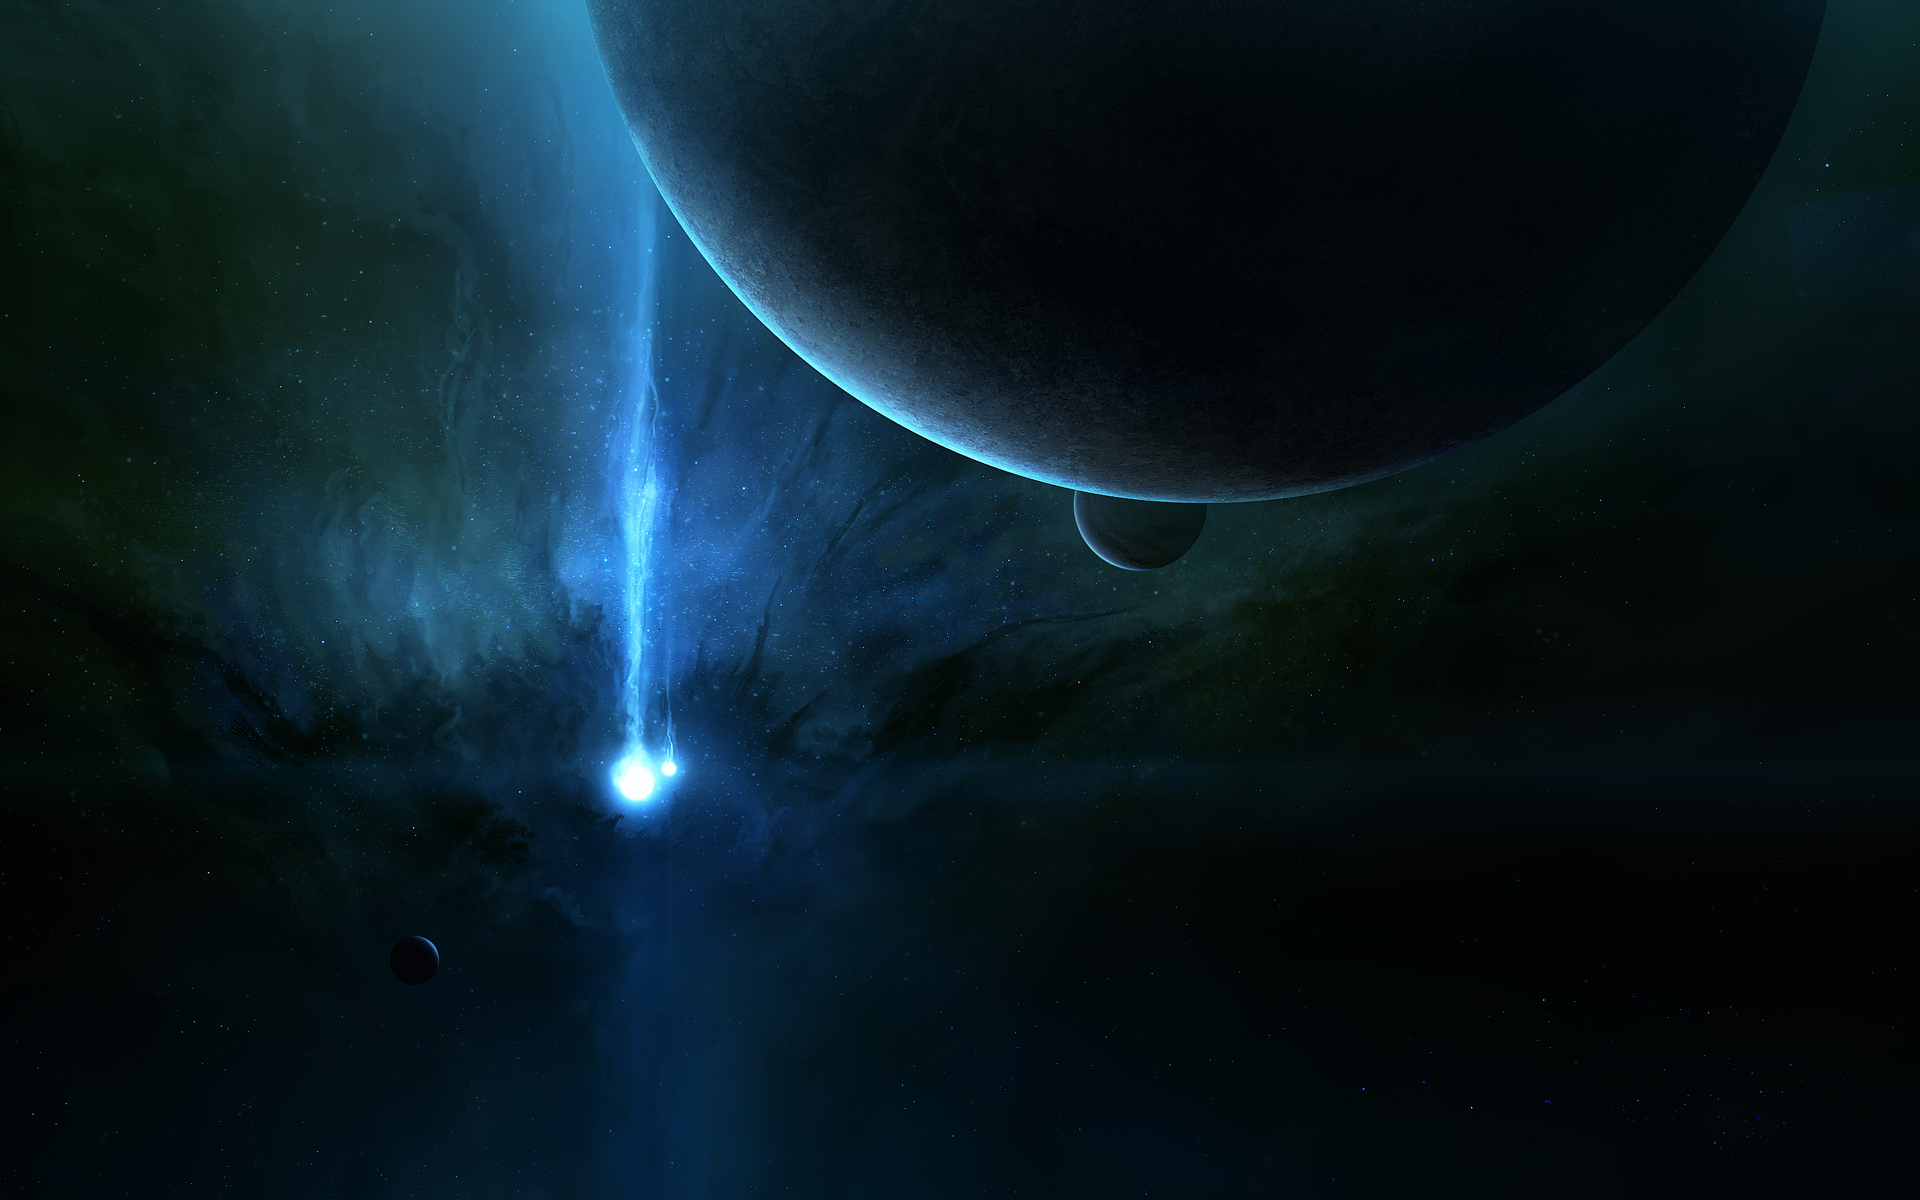  Planets HQ Background Images